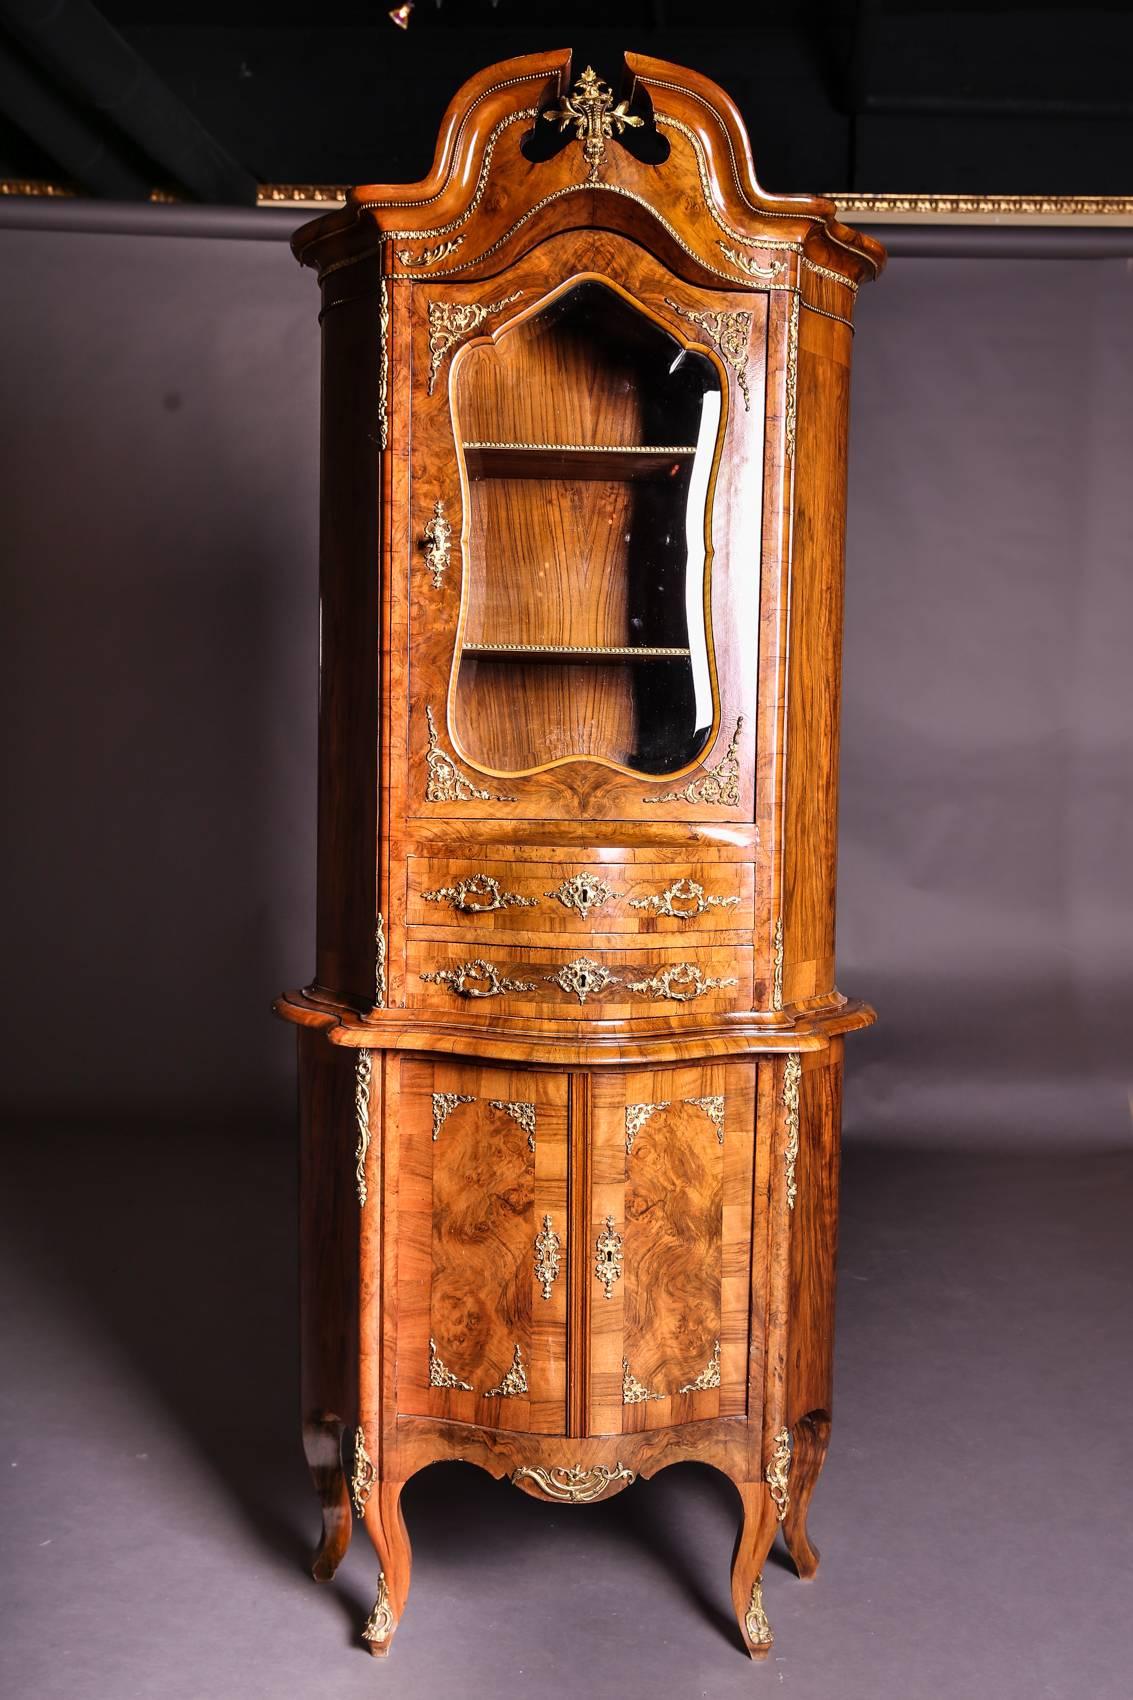 Vitrine in Dresden Baroque. Walnut freed and felted. All-round slightly curved body with rich, gilded bronze motifs. Prefabricated, cracked gable with bronze bead contour. Cut-out glass door over two drawers. Two-door base on high curved